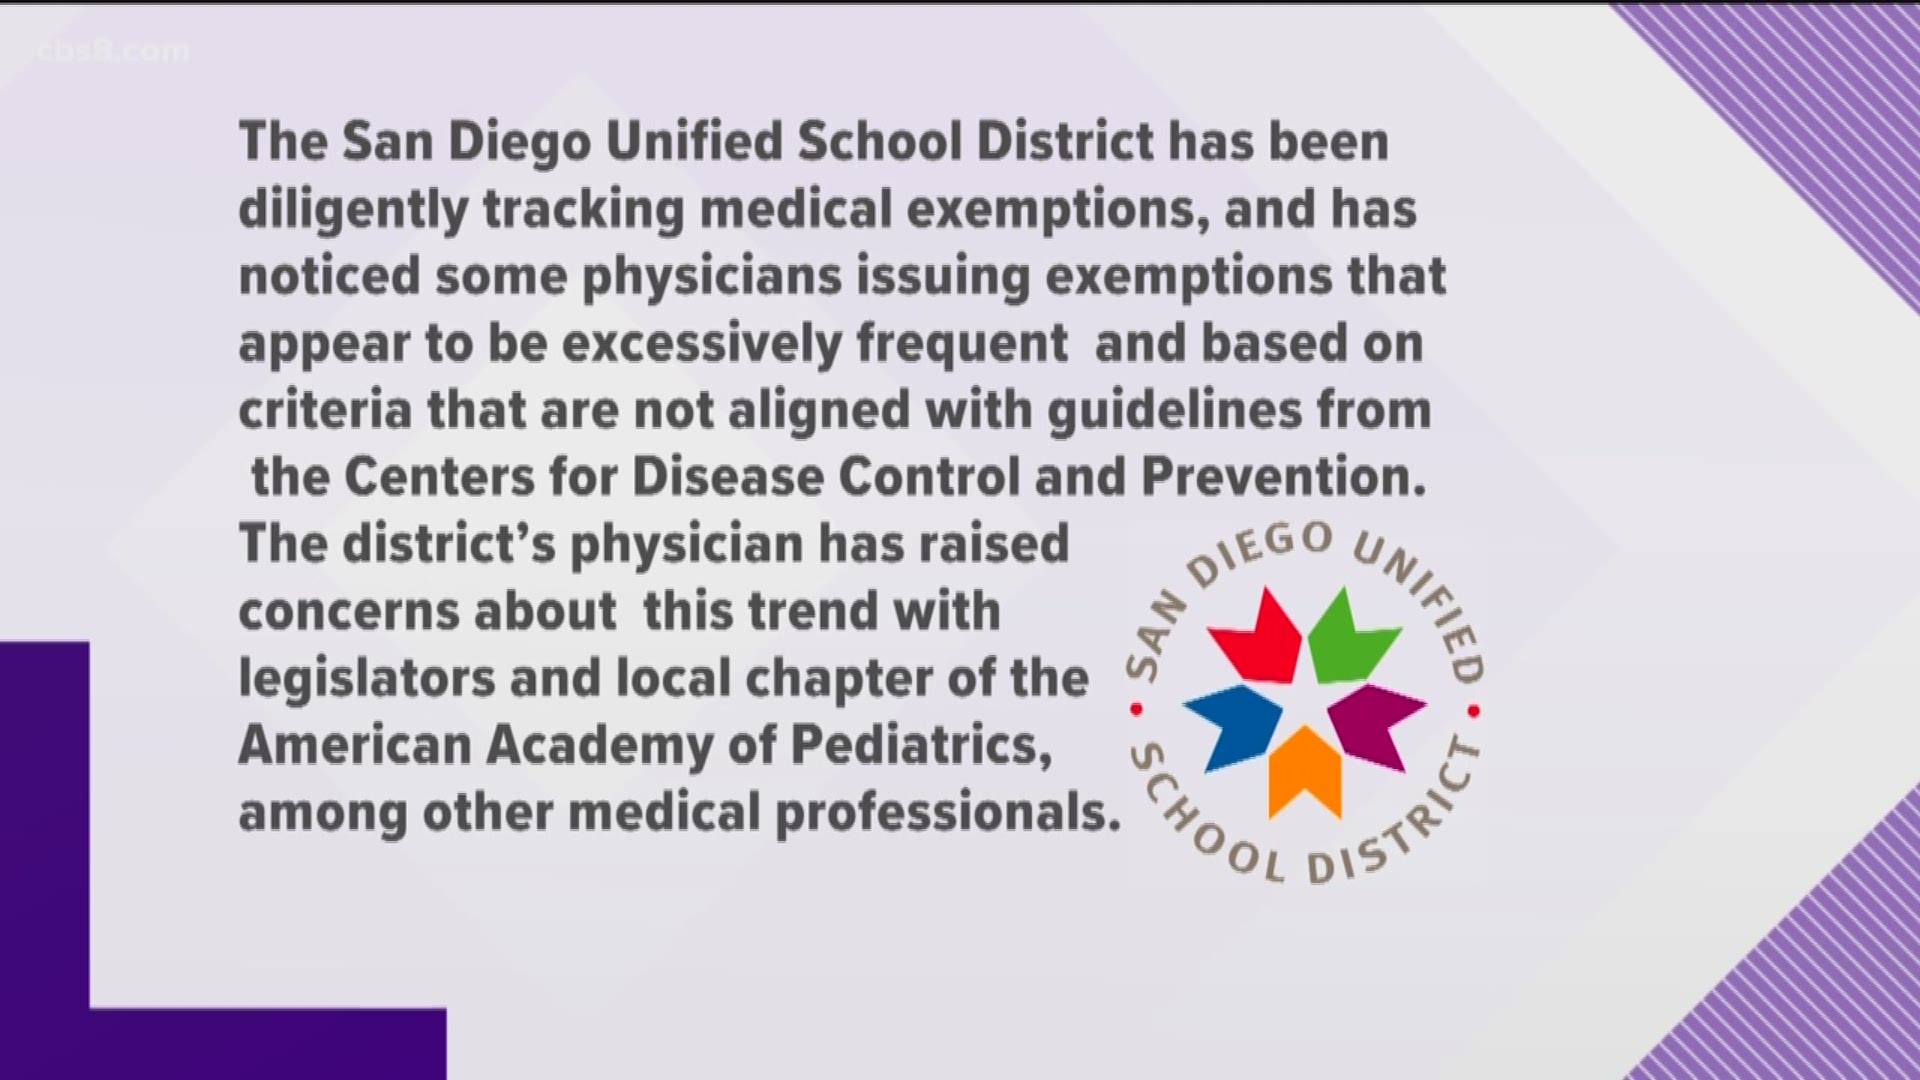 Since 2015, the San Diego Unified School District has approved 486 medical exemptions from vaccines.